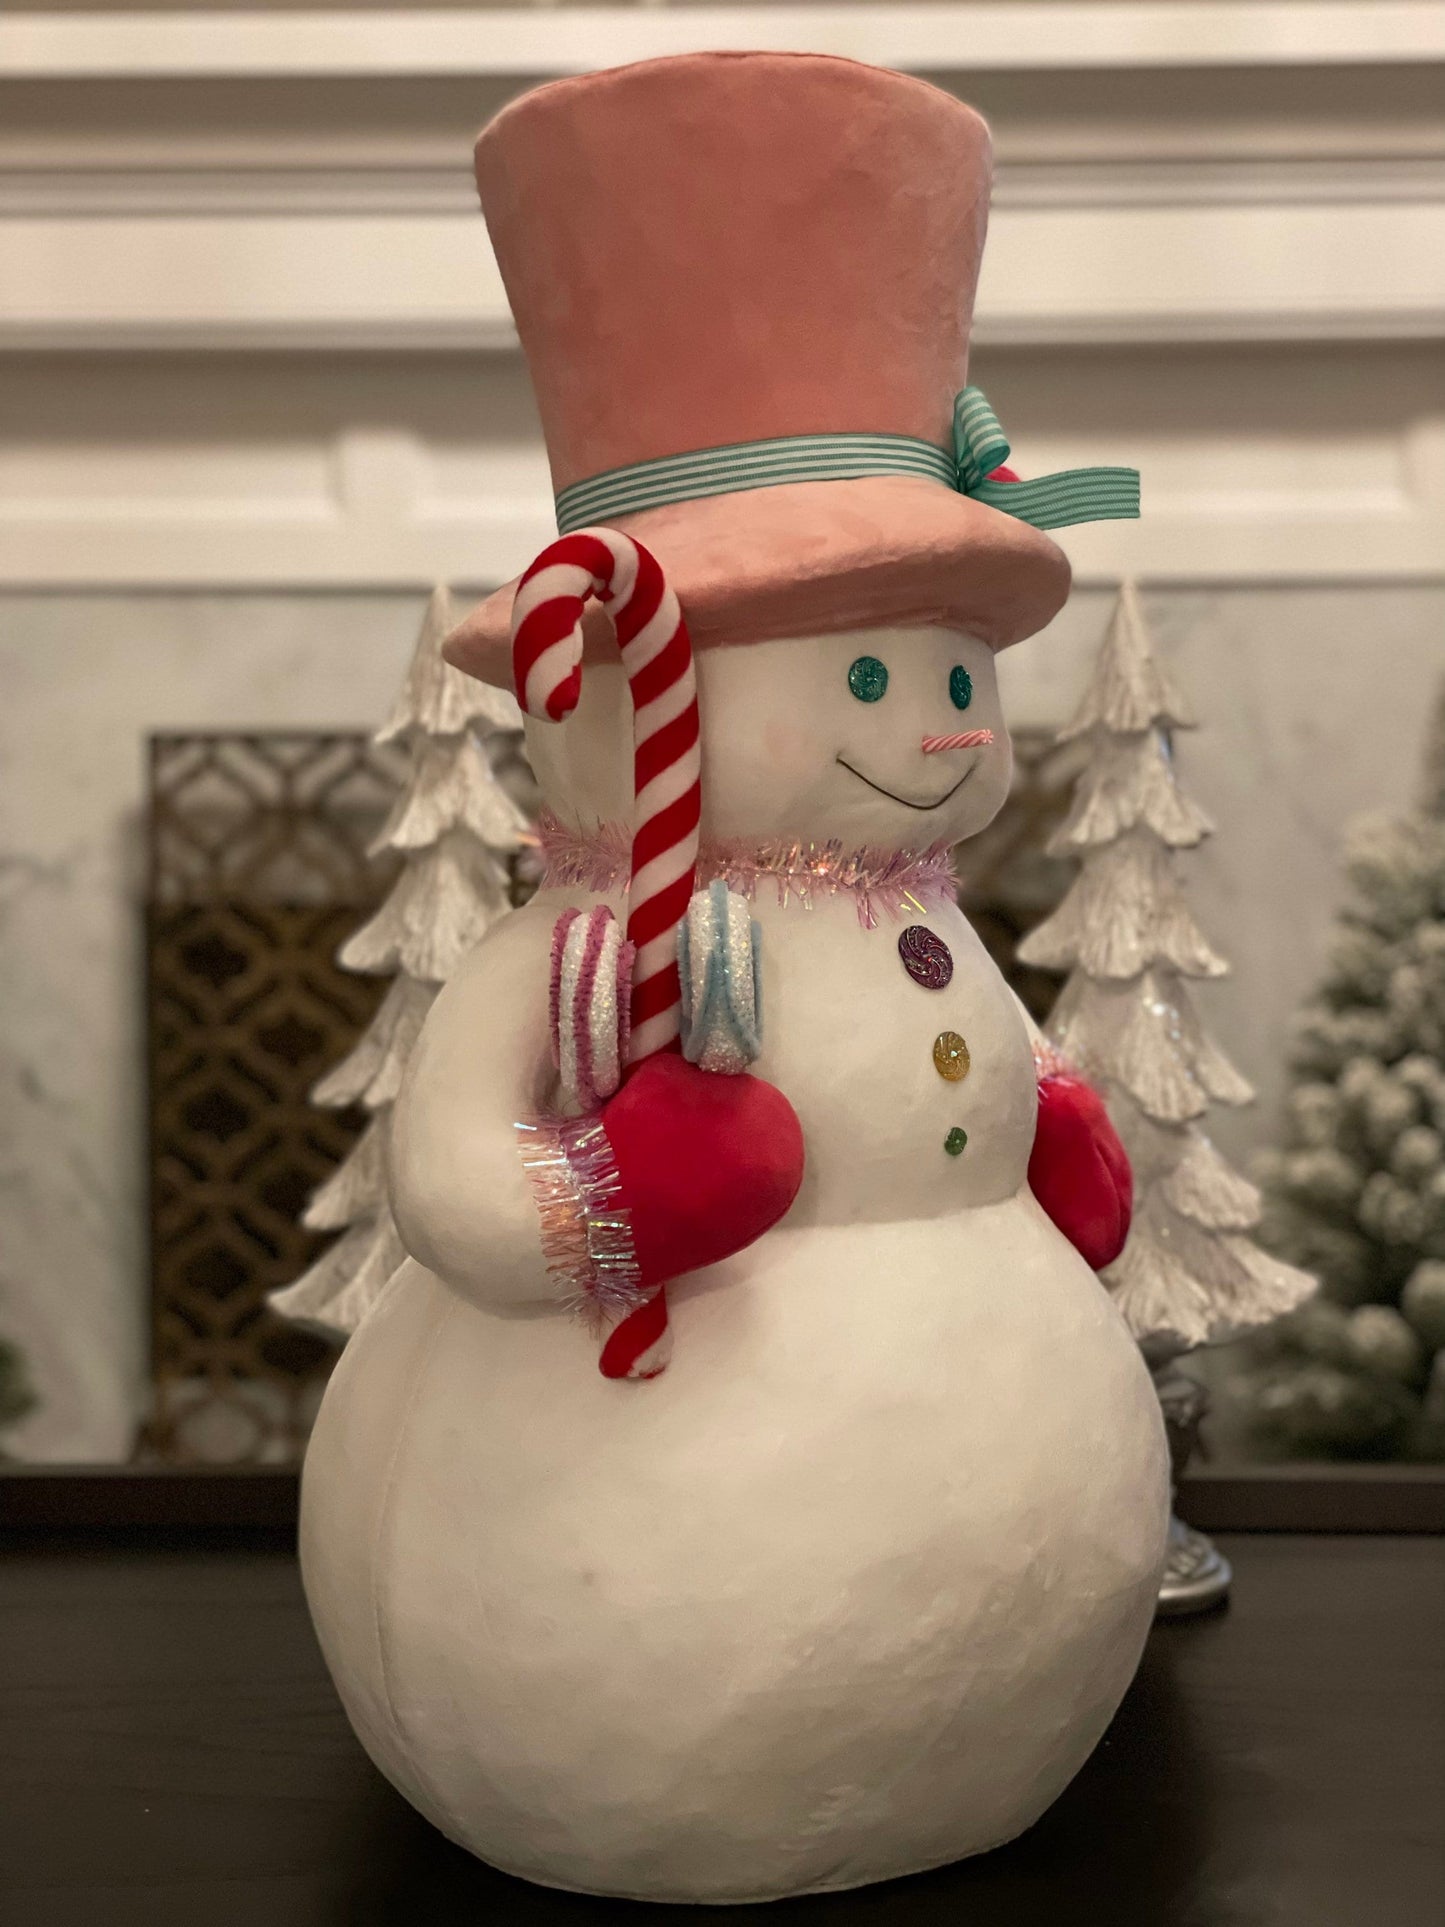 24”h x 13.4” w Snowman with pink hat holding a candy cane. Christmas. Ornament. Tabletop. Display.